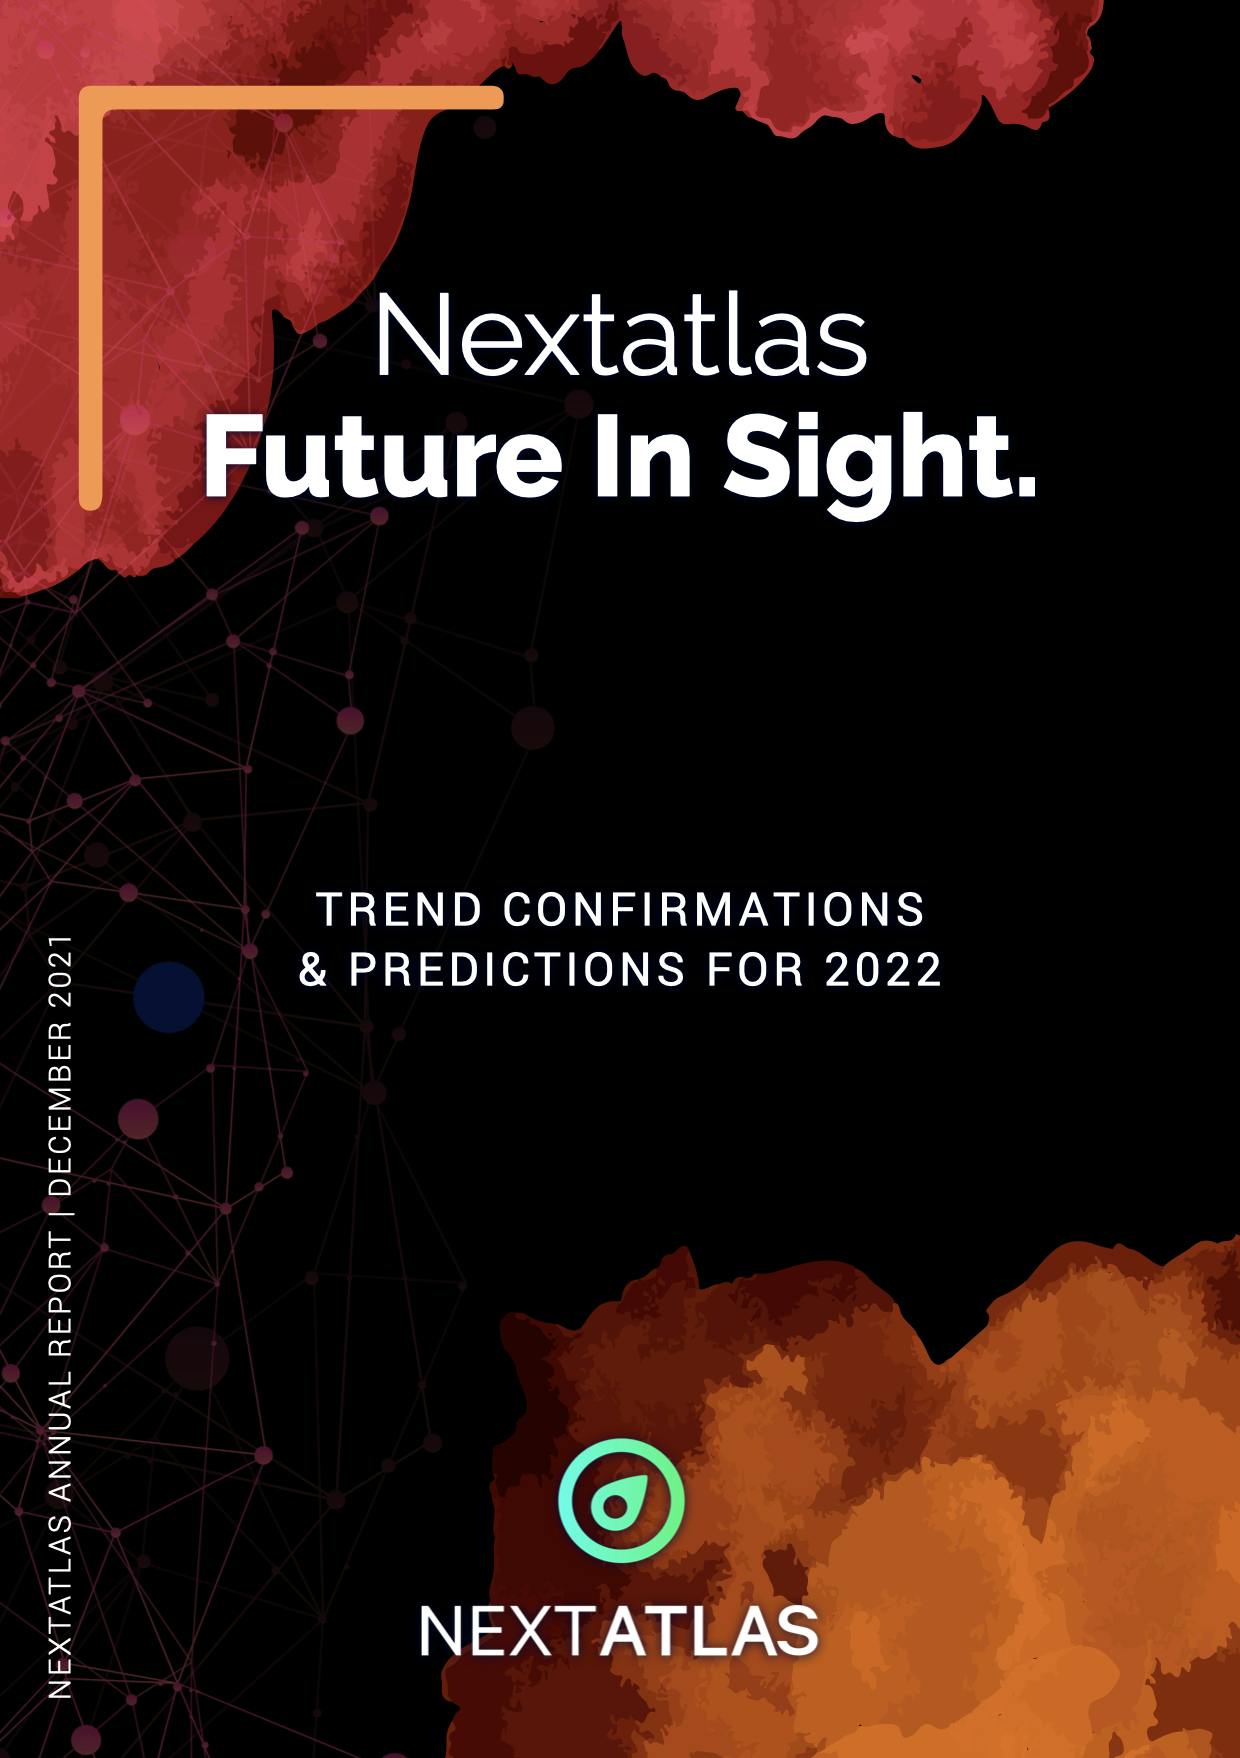 Trend confirmations & predictions for 2022